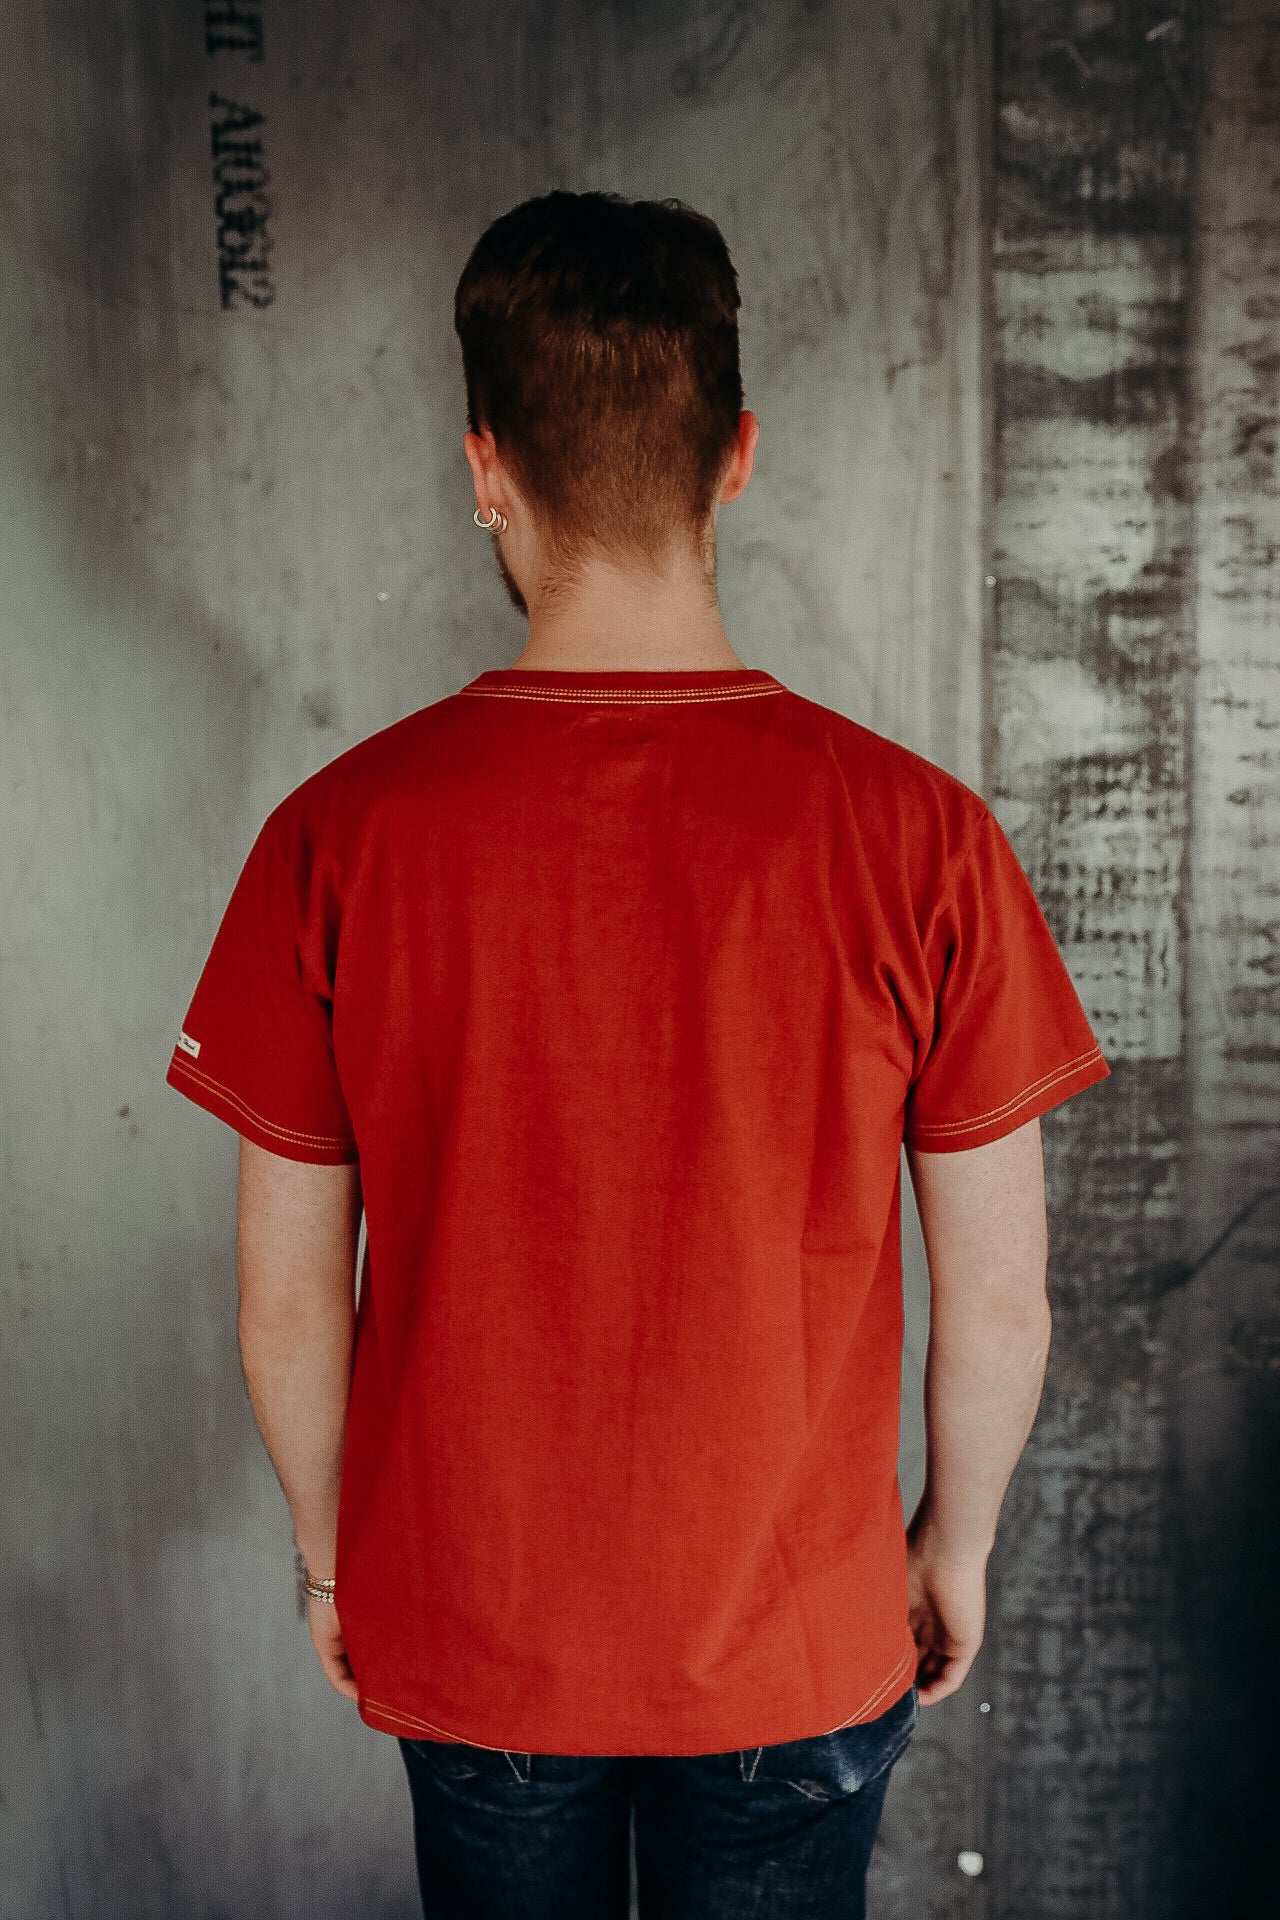 T-Shirt - THC Plain in Red